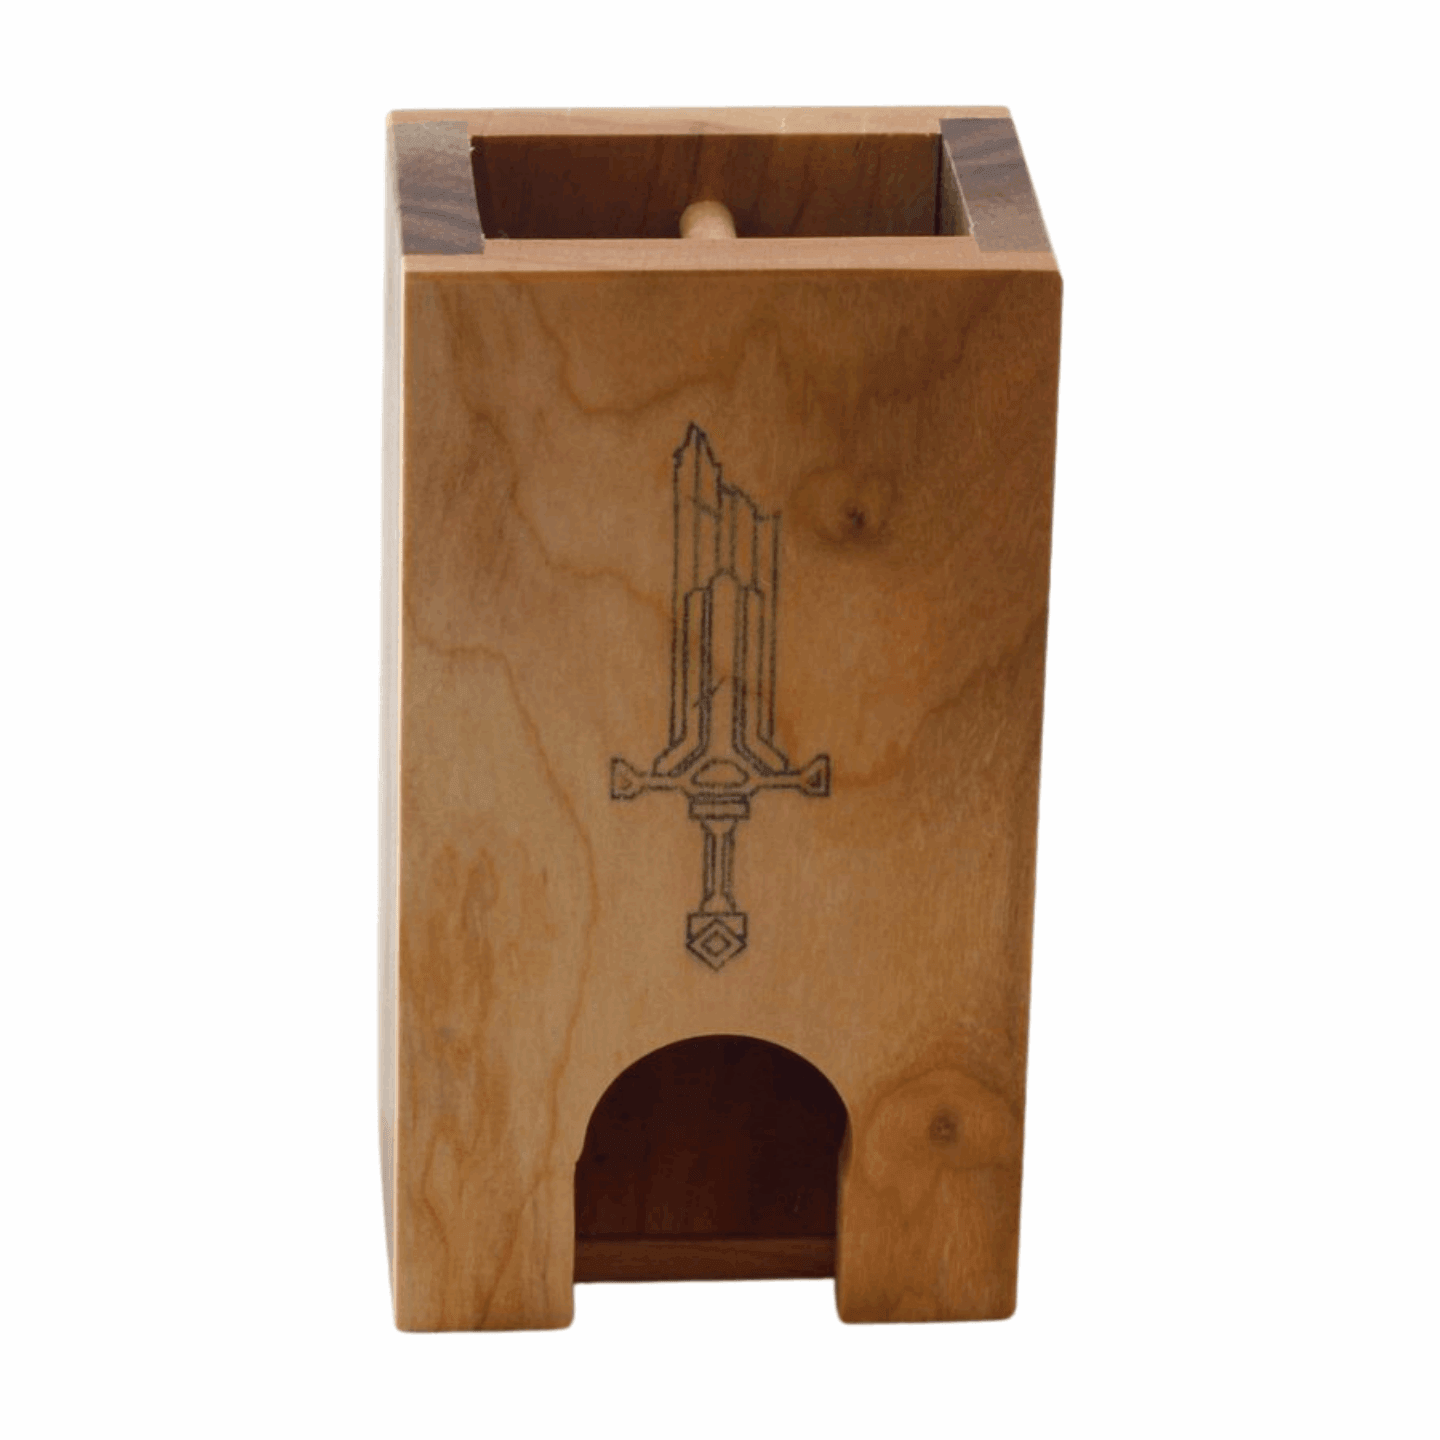 Small Cherry and Walnut Dice Tower with Sword - Dragon Armor Games